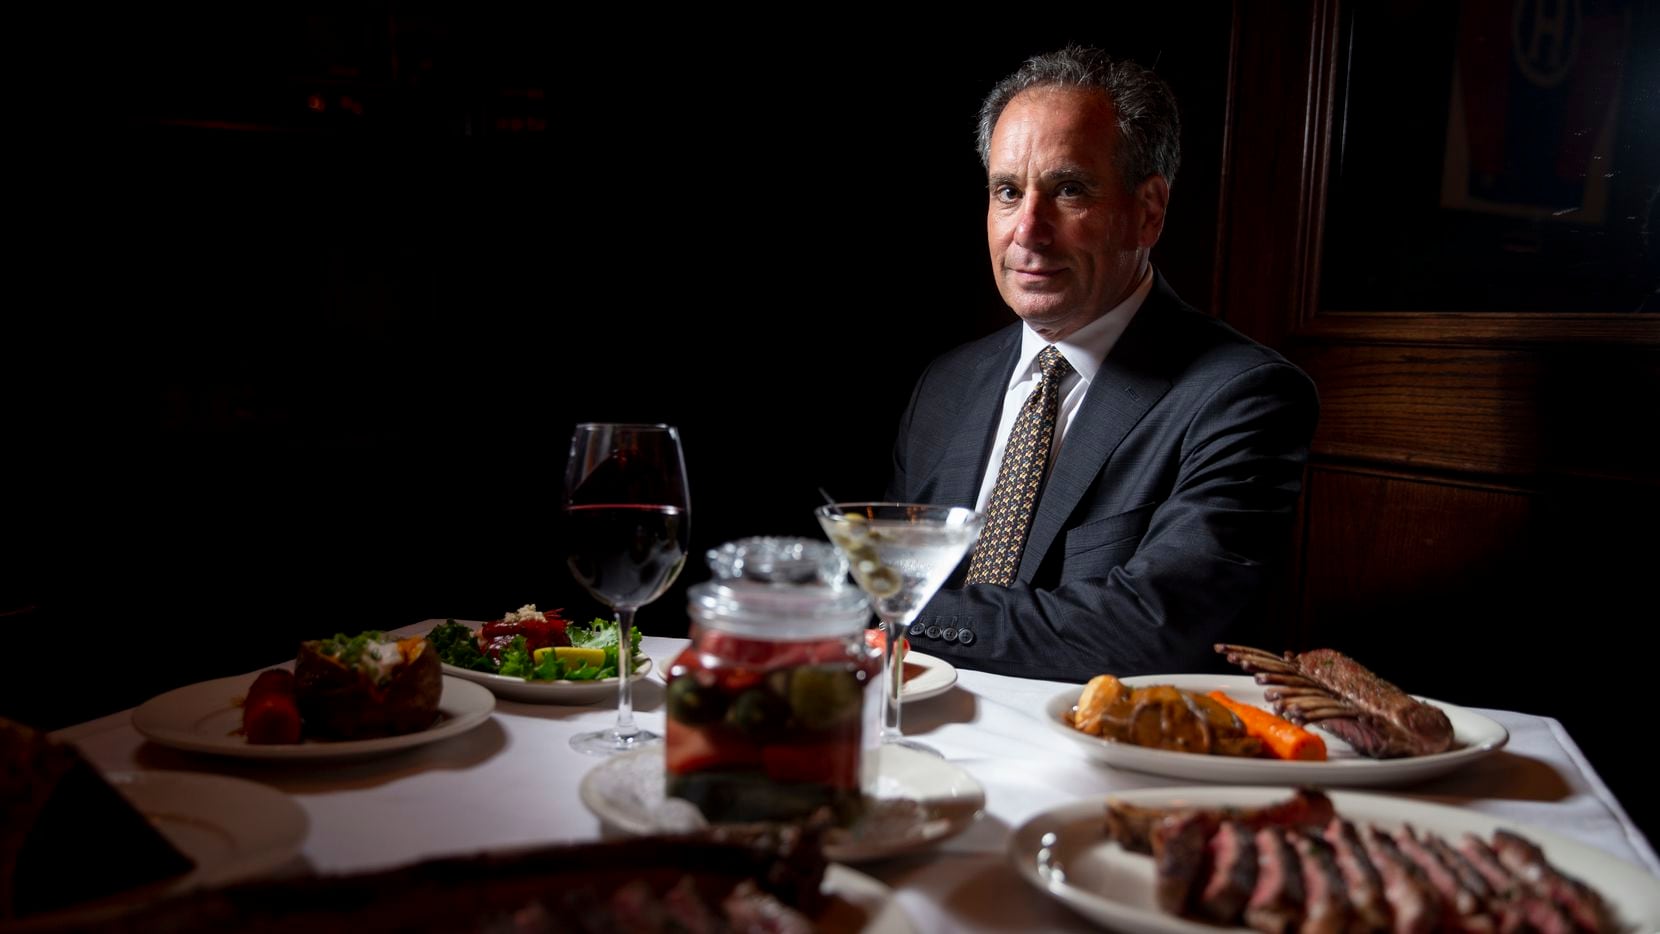 Bob Sambol, owner of Bob’s Steak and Chop House, says his restaurant will be sanitized over...